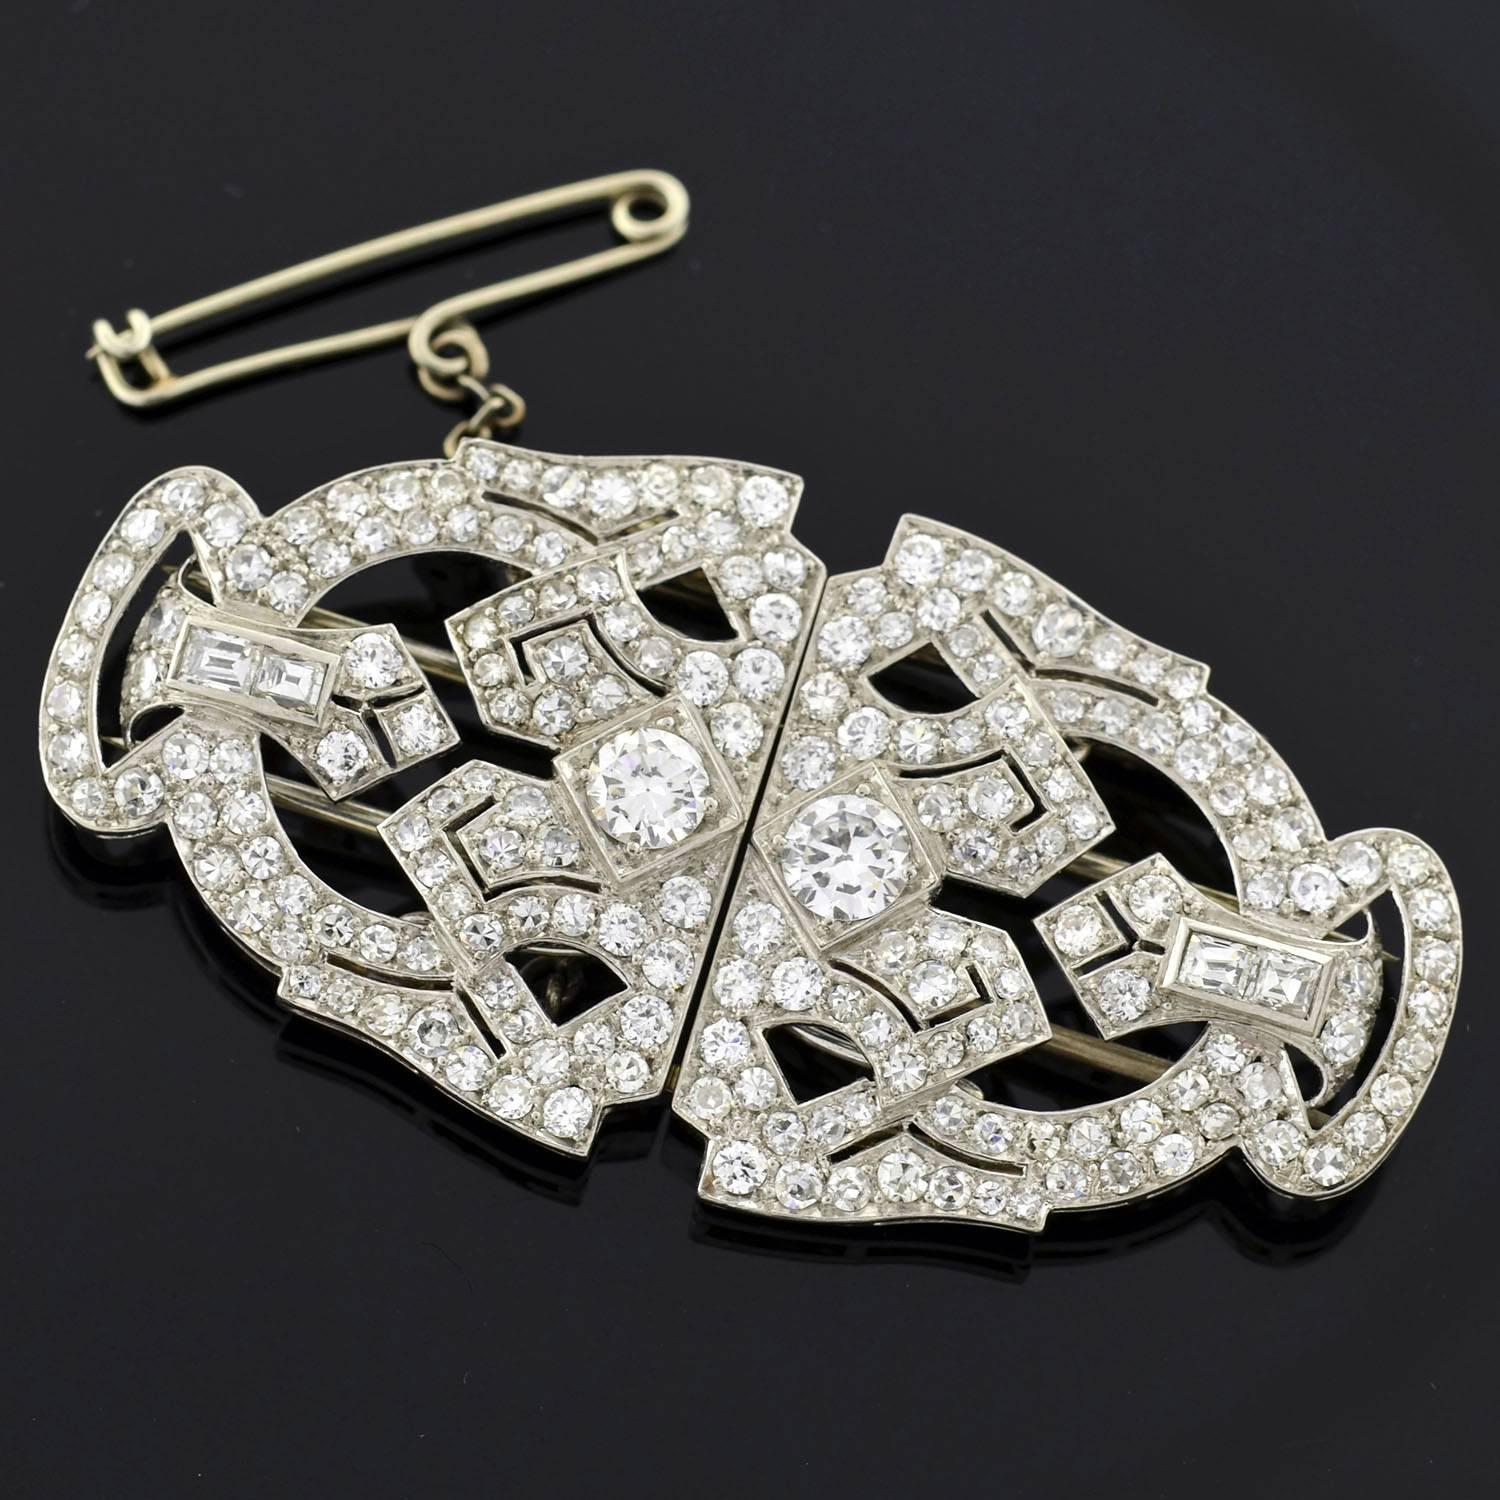 Art Deco Diamond Platinum Encrusted Pin Clips In Excellent Condition For Sale In Narberth, PA